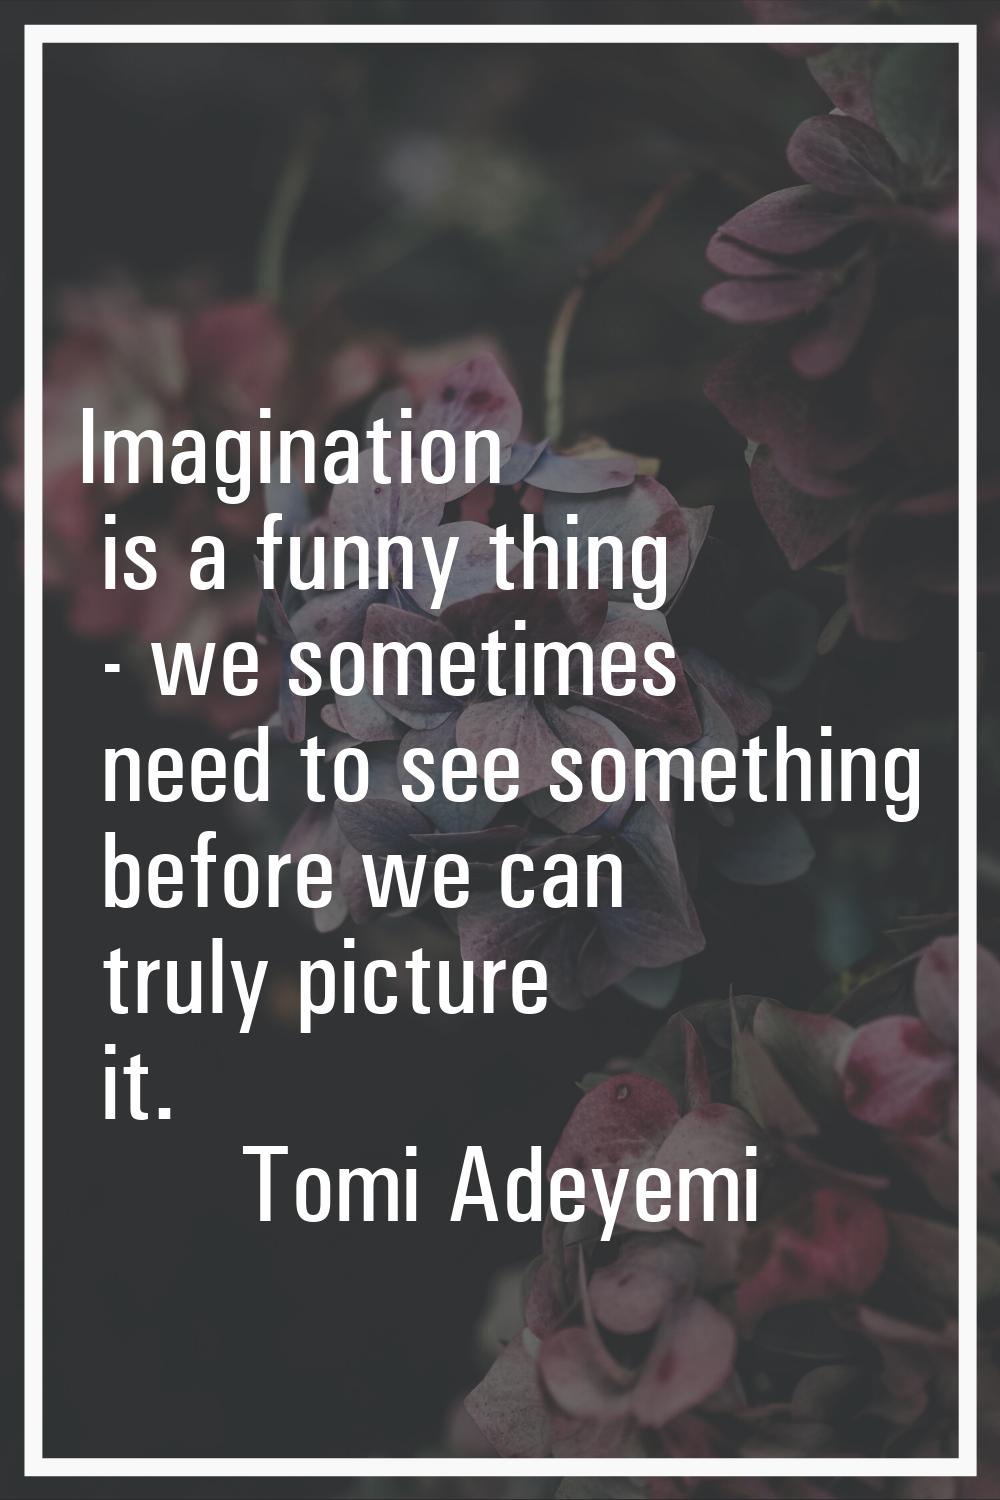 Imagination is a funny thing - we sometimes need to see something before we can truly picture it.